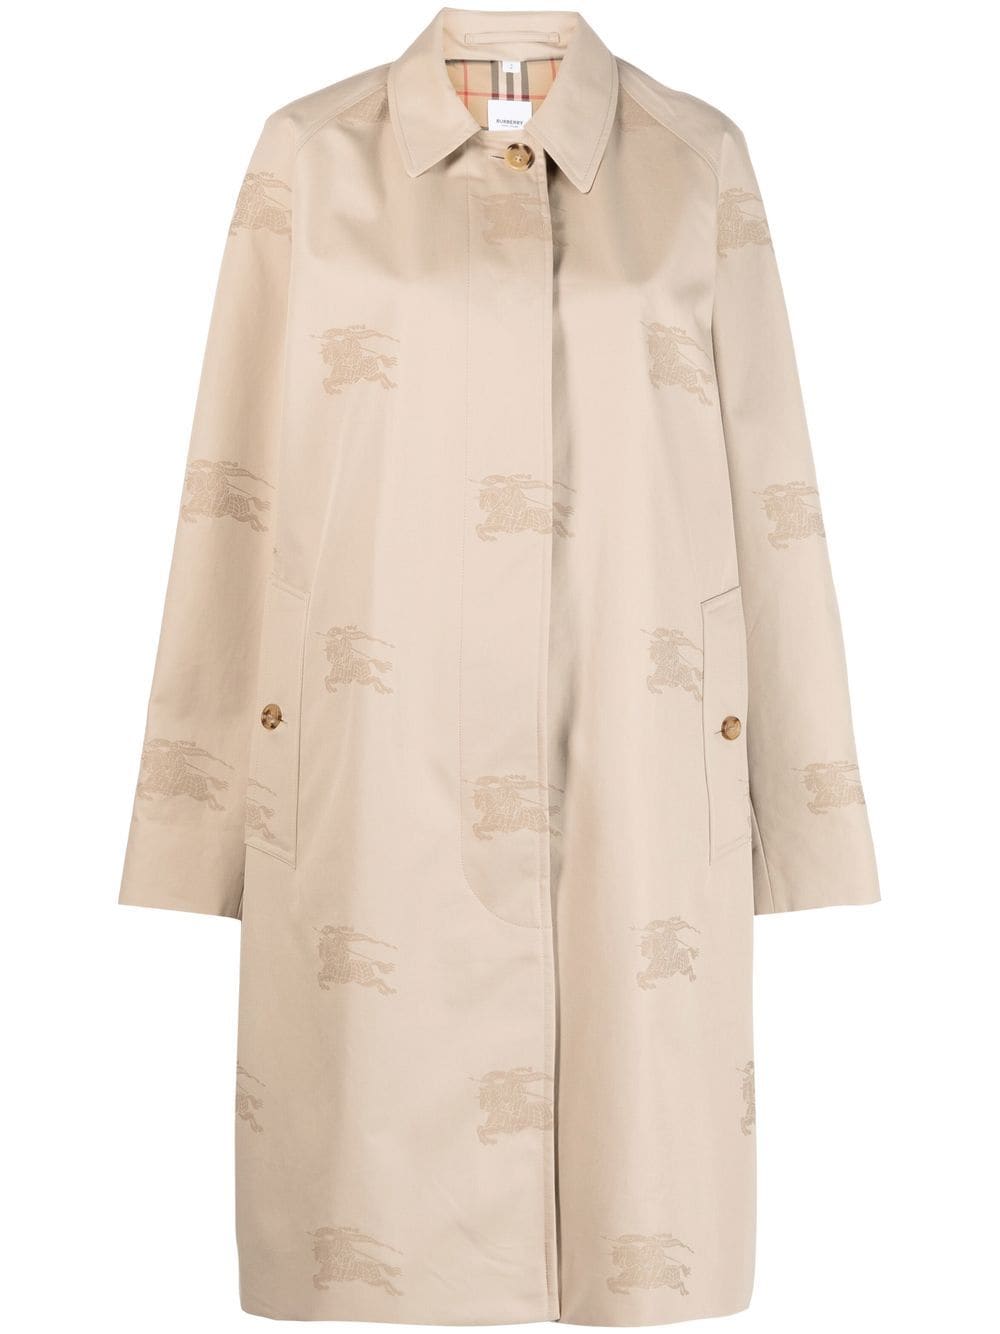 Burberry all-over-embroidered coat - Neutrals von Burberry